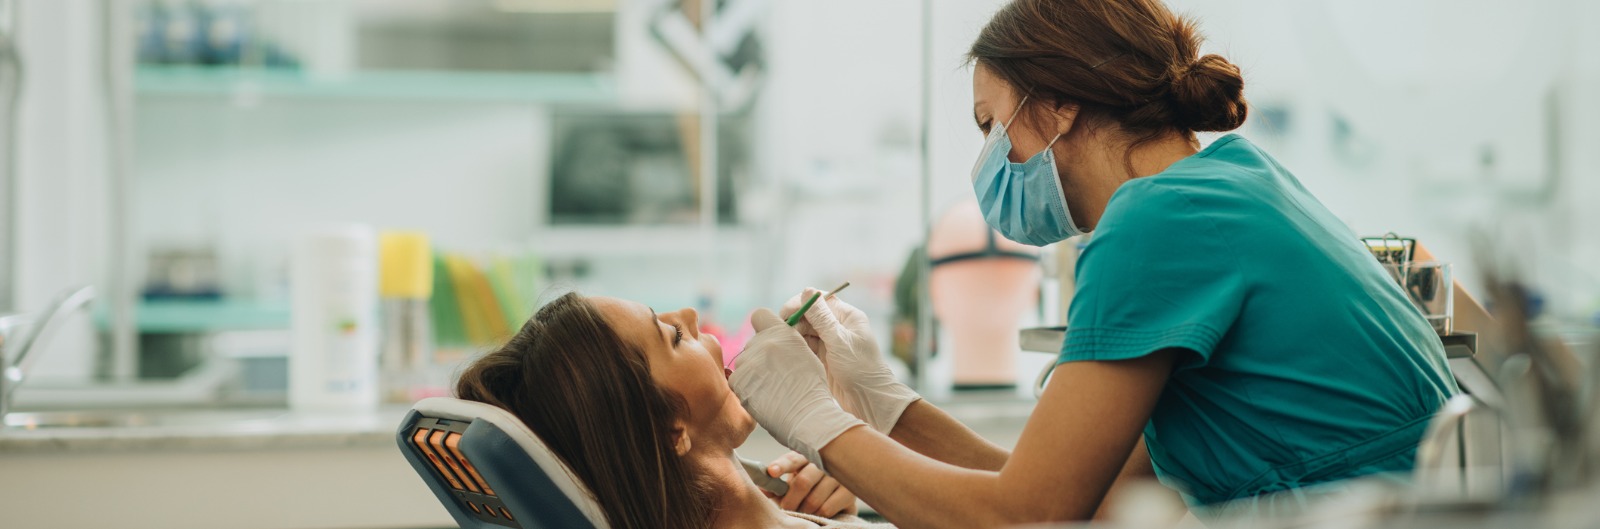 young-woman-having-her-teeth-checked-during-appointment-at-dentists-picture-1600x529.jpg